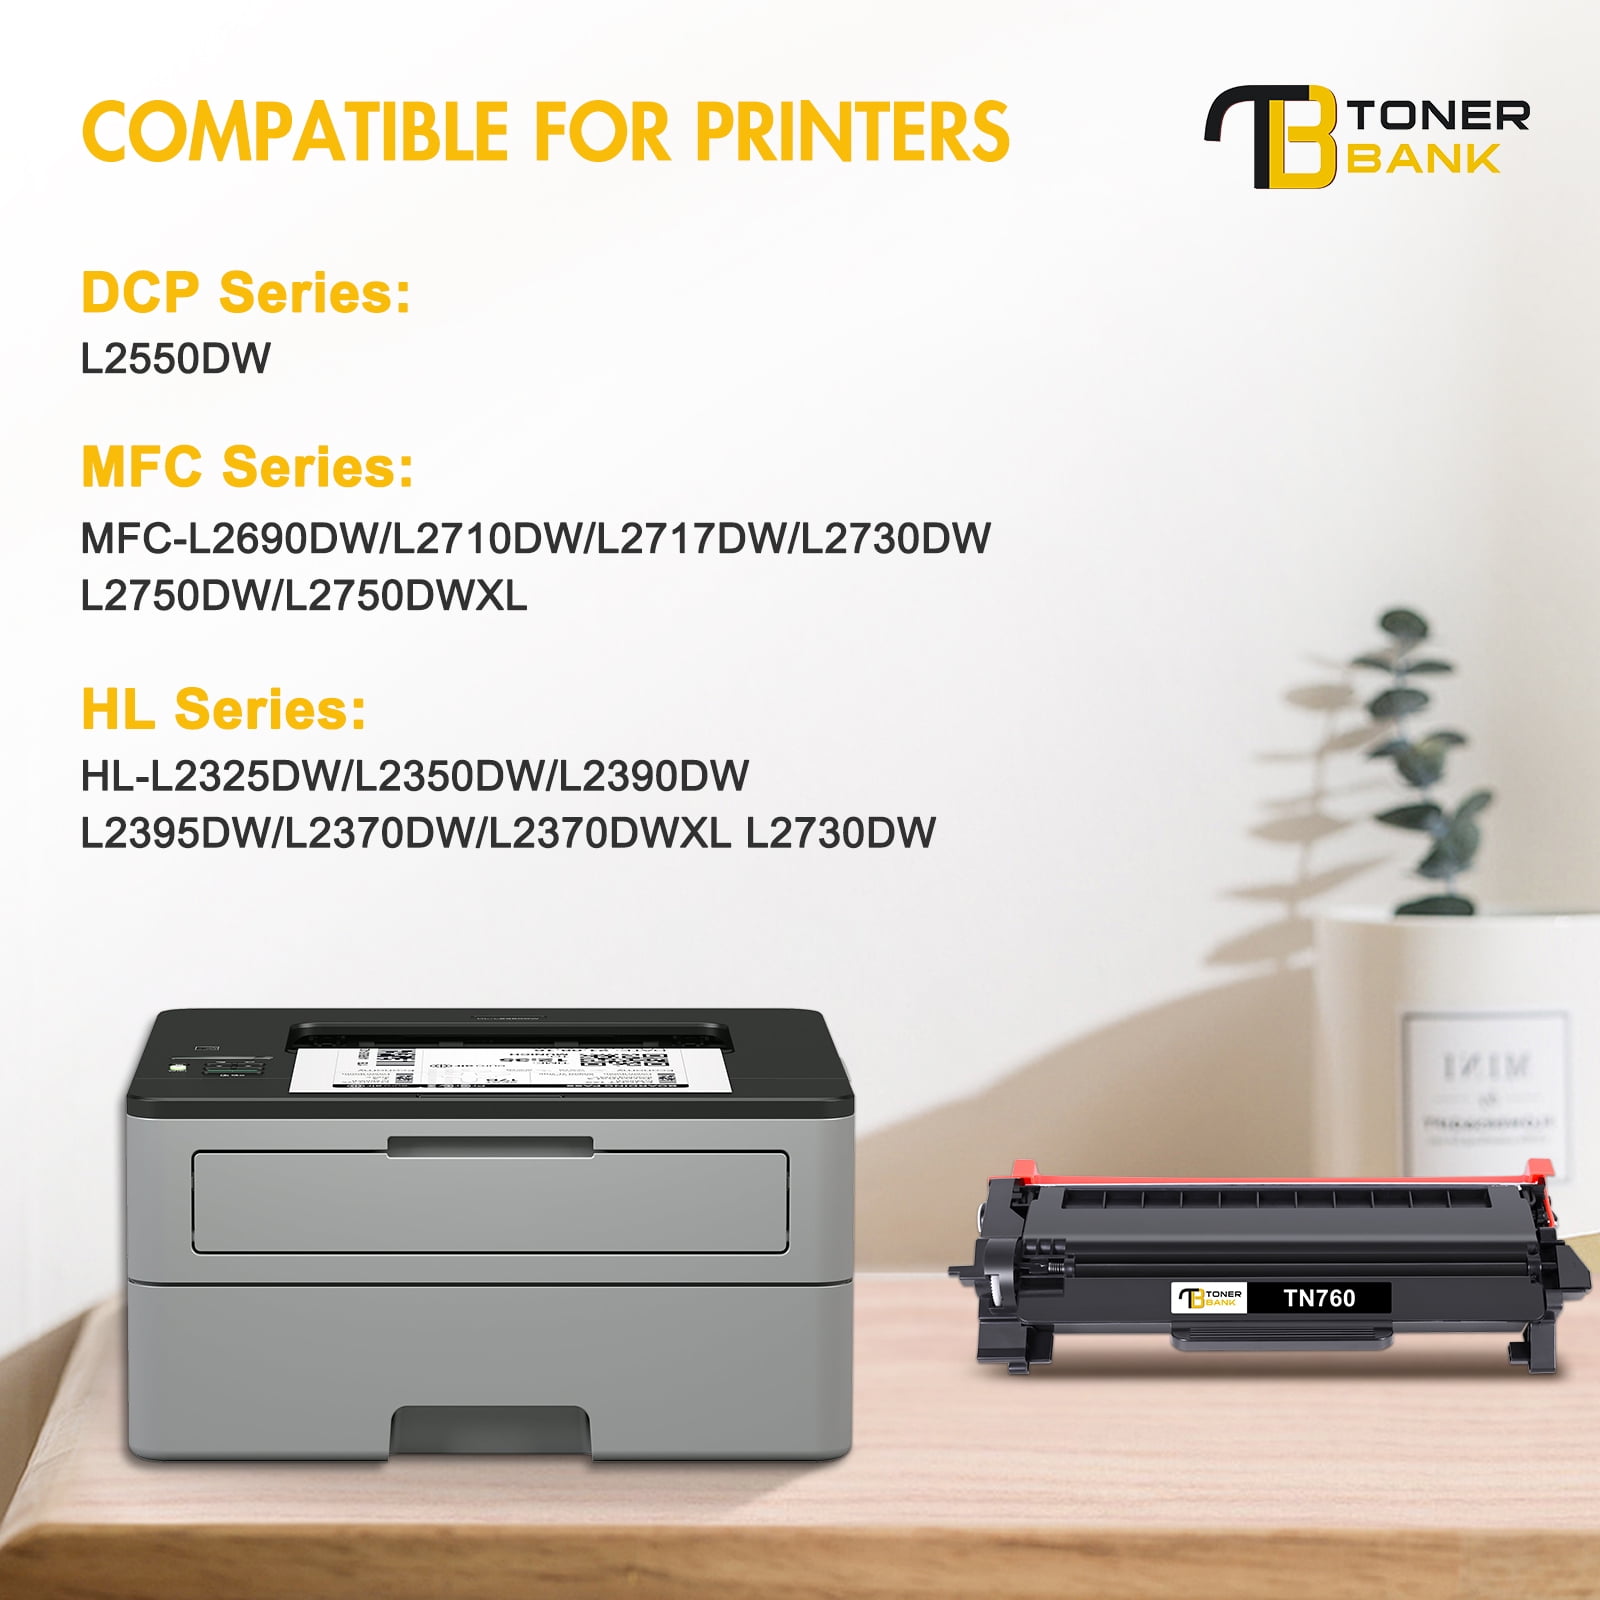 TN2420 TN-2420 Toner Powder Compatible for Brother DCP-L2530DW MFC-L2730DW  MFC-L2750DW MFC L2750DW MFC-L2710DW Printer